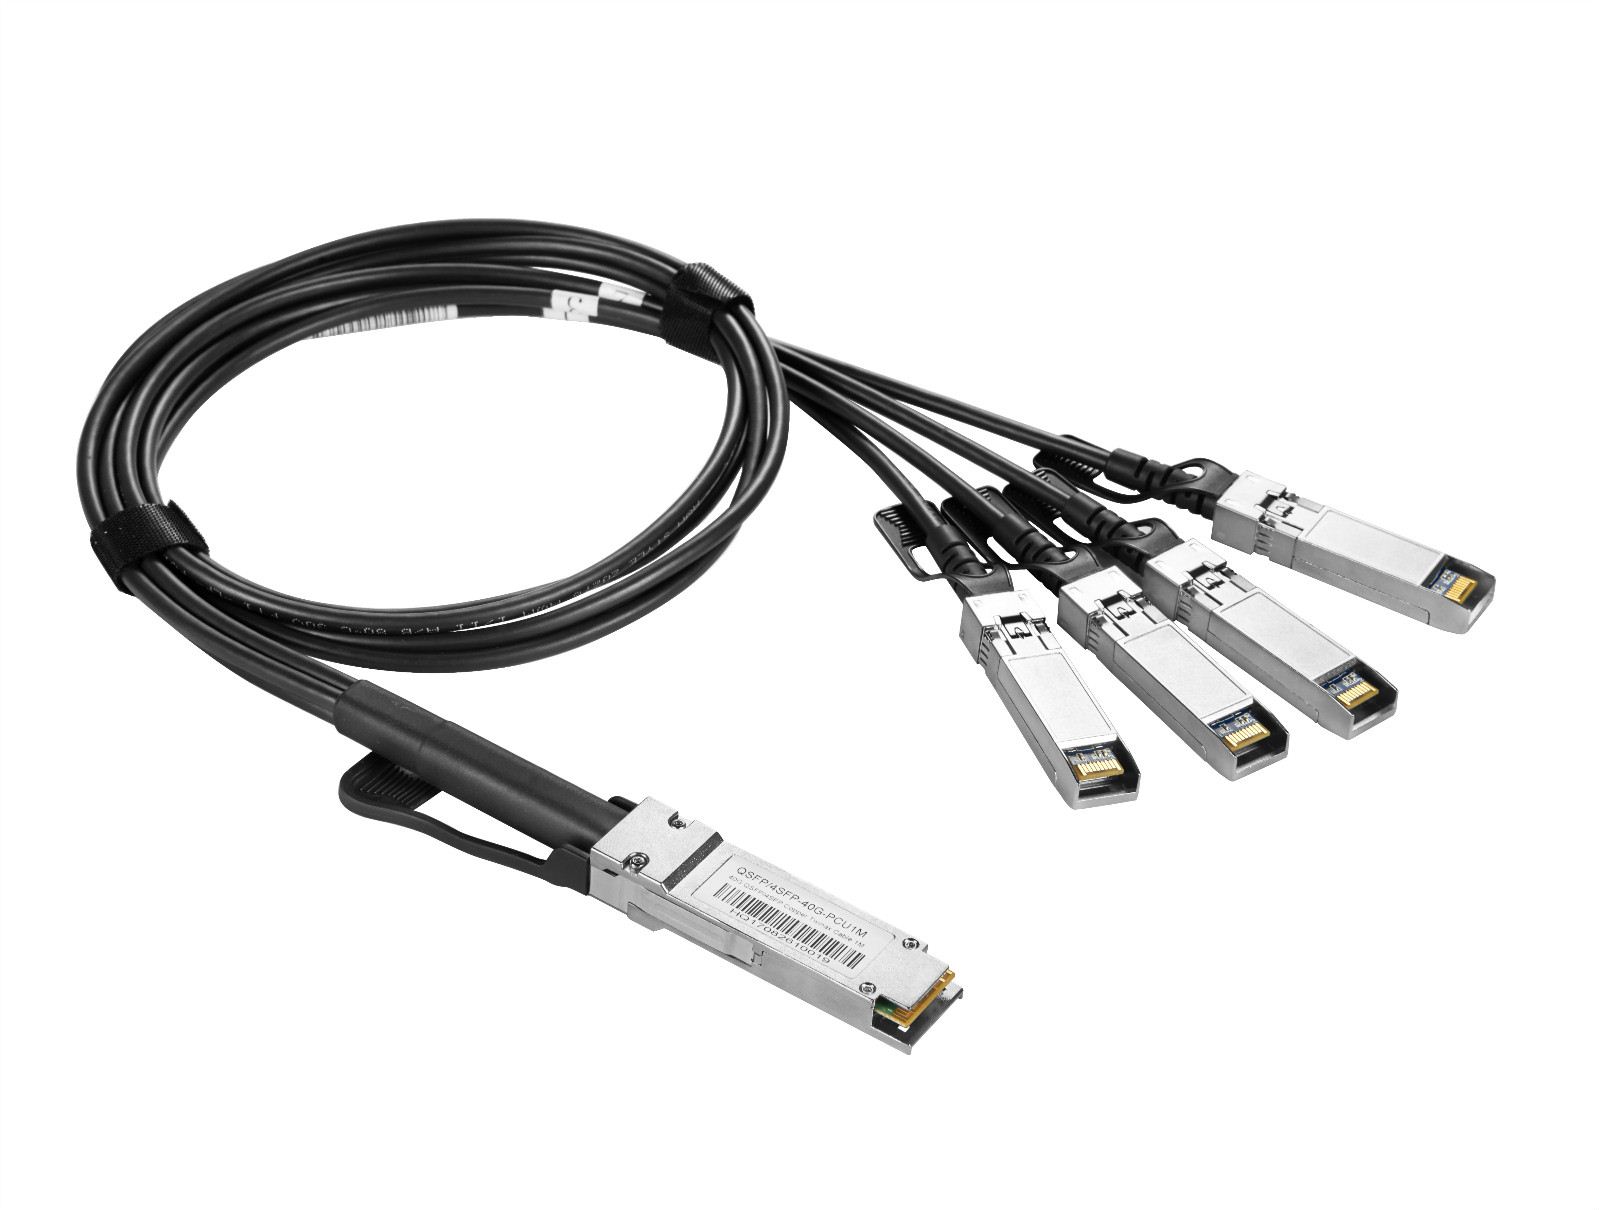 56G QSFP DAC choose HTD-InforCable,it specializing inQSFP28